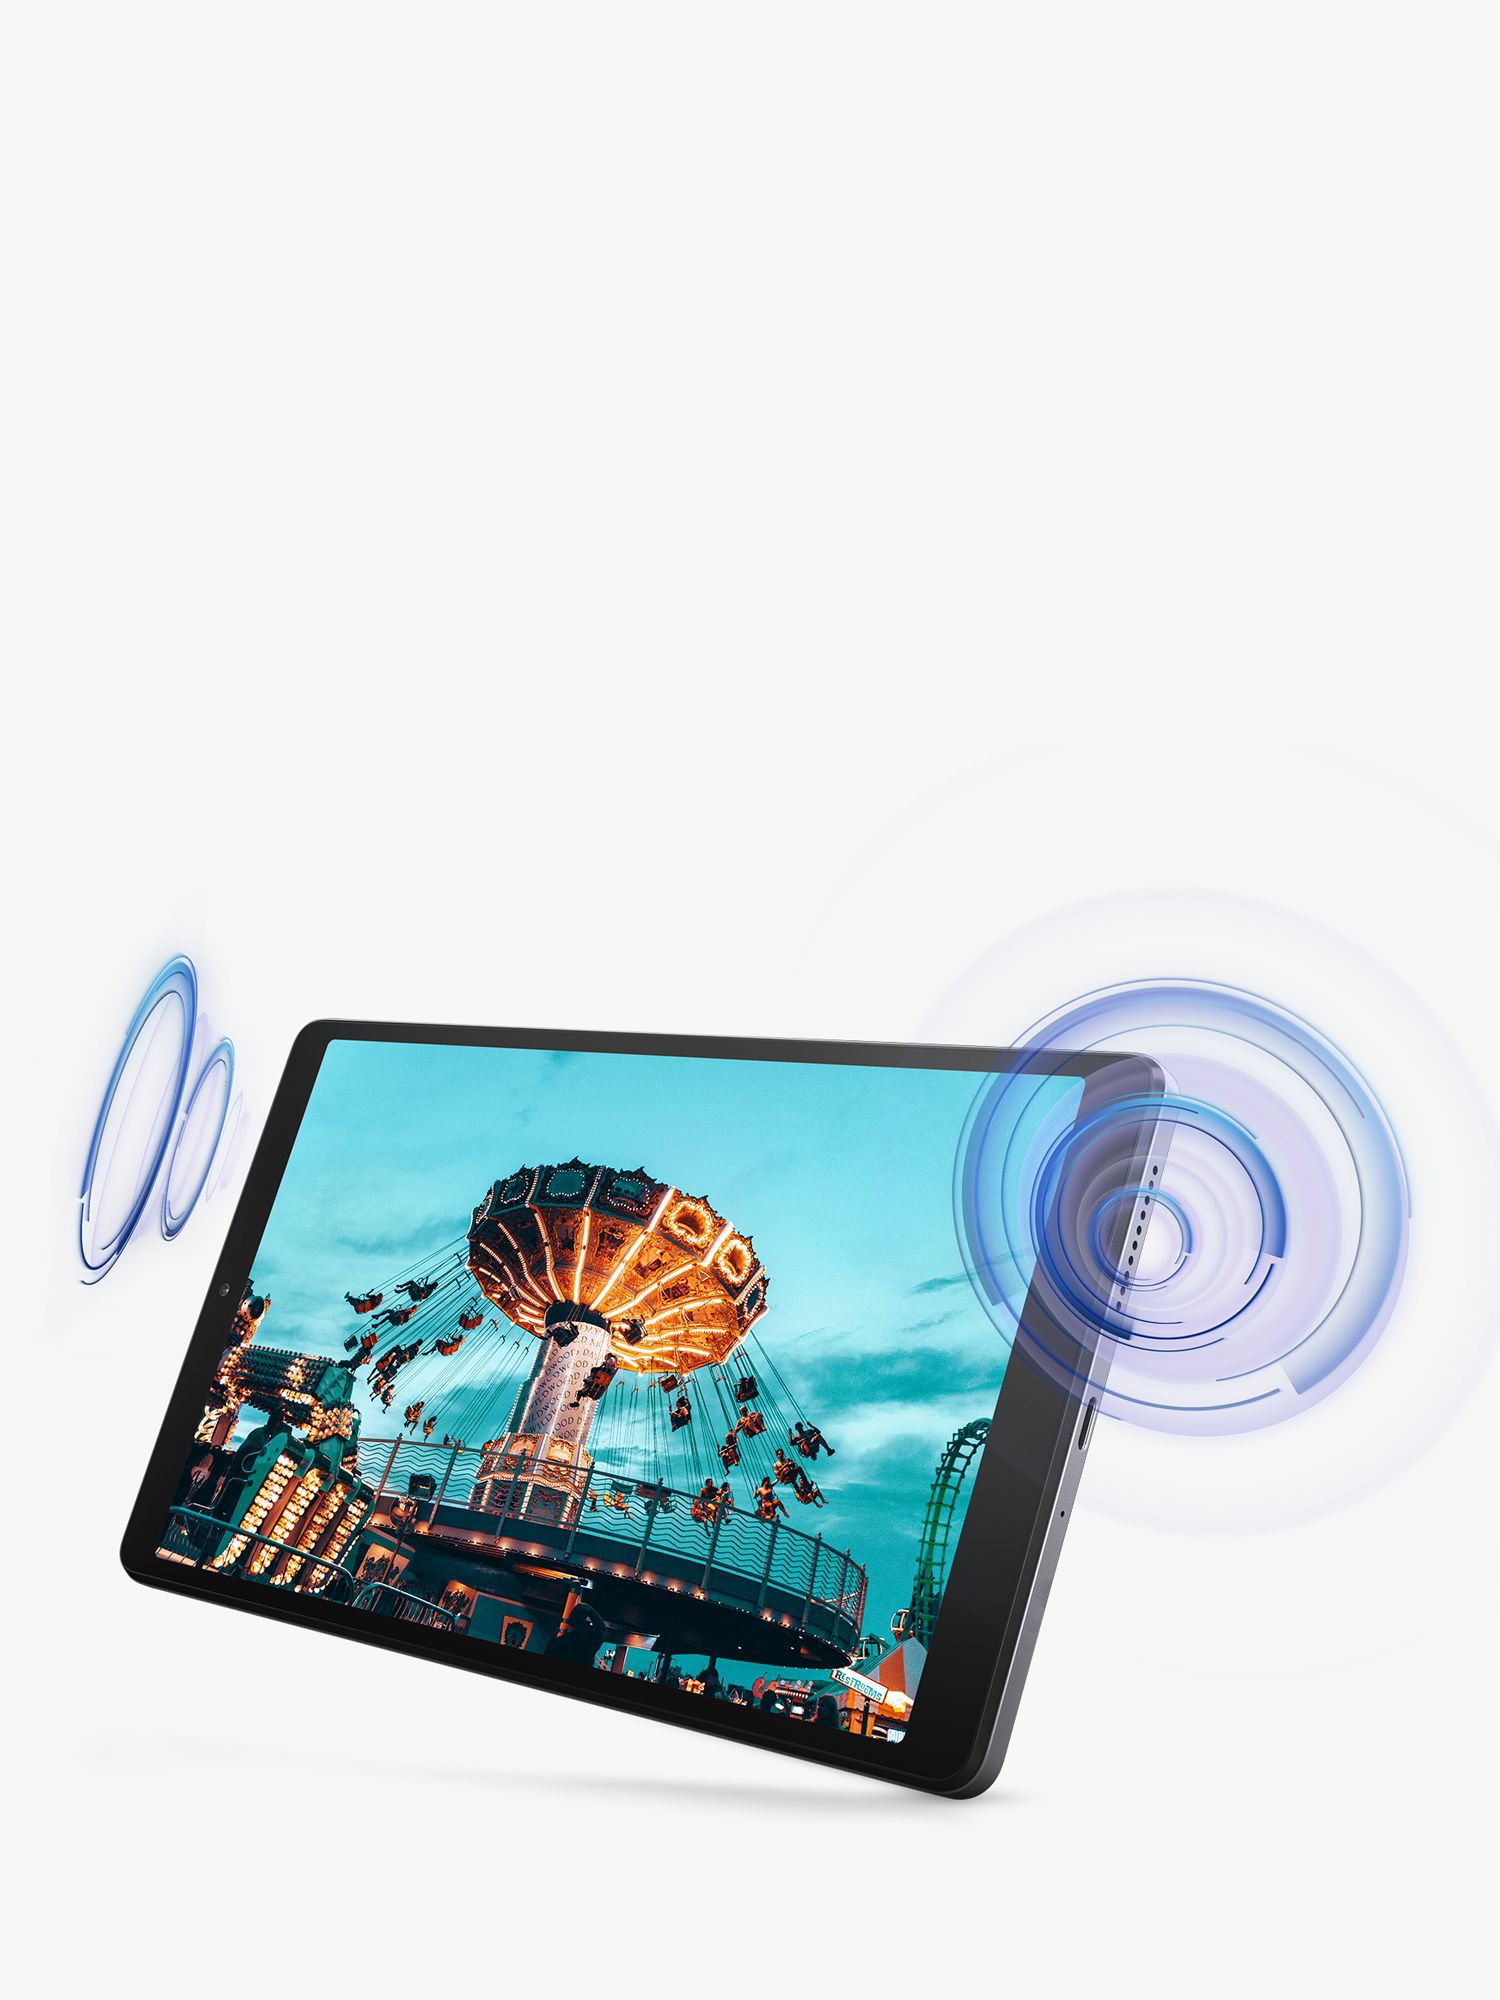  Lenovo Tab M9-2023 - Tablet - Long Battery Life - 9 HD -  Front 2MP & Rear 8MP Camera - 3GB Memory - 32GB Storage - Android 12 or  Later - Folio Case Included,Gray : Electronics